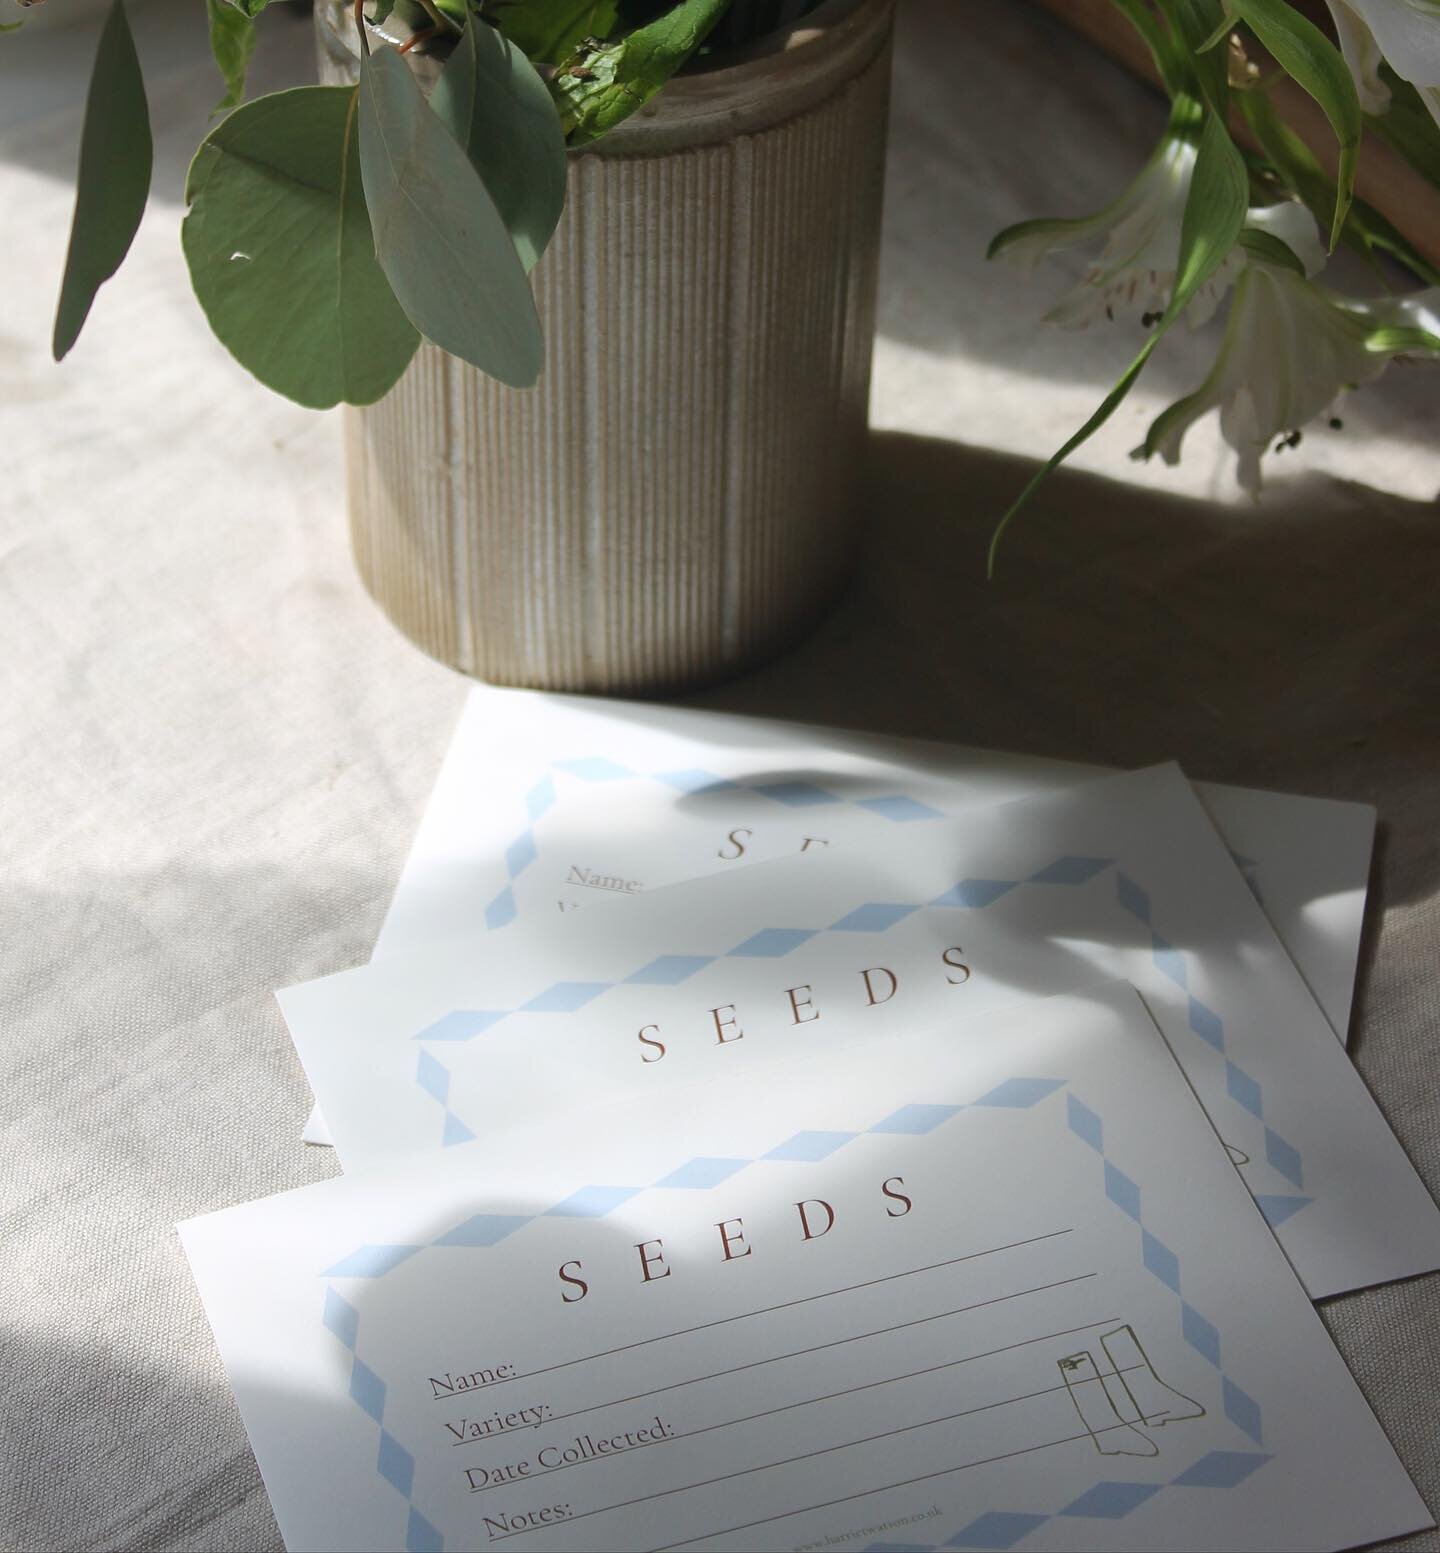 I have a new little product! Seed envelopes, perfect for those green fingered people! 🌷
Printed on beautiful recycled cream envelopes. These will be available in little sets. 

And will of course be coming with me to Gardeners World which is just ov